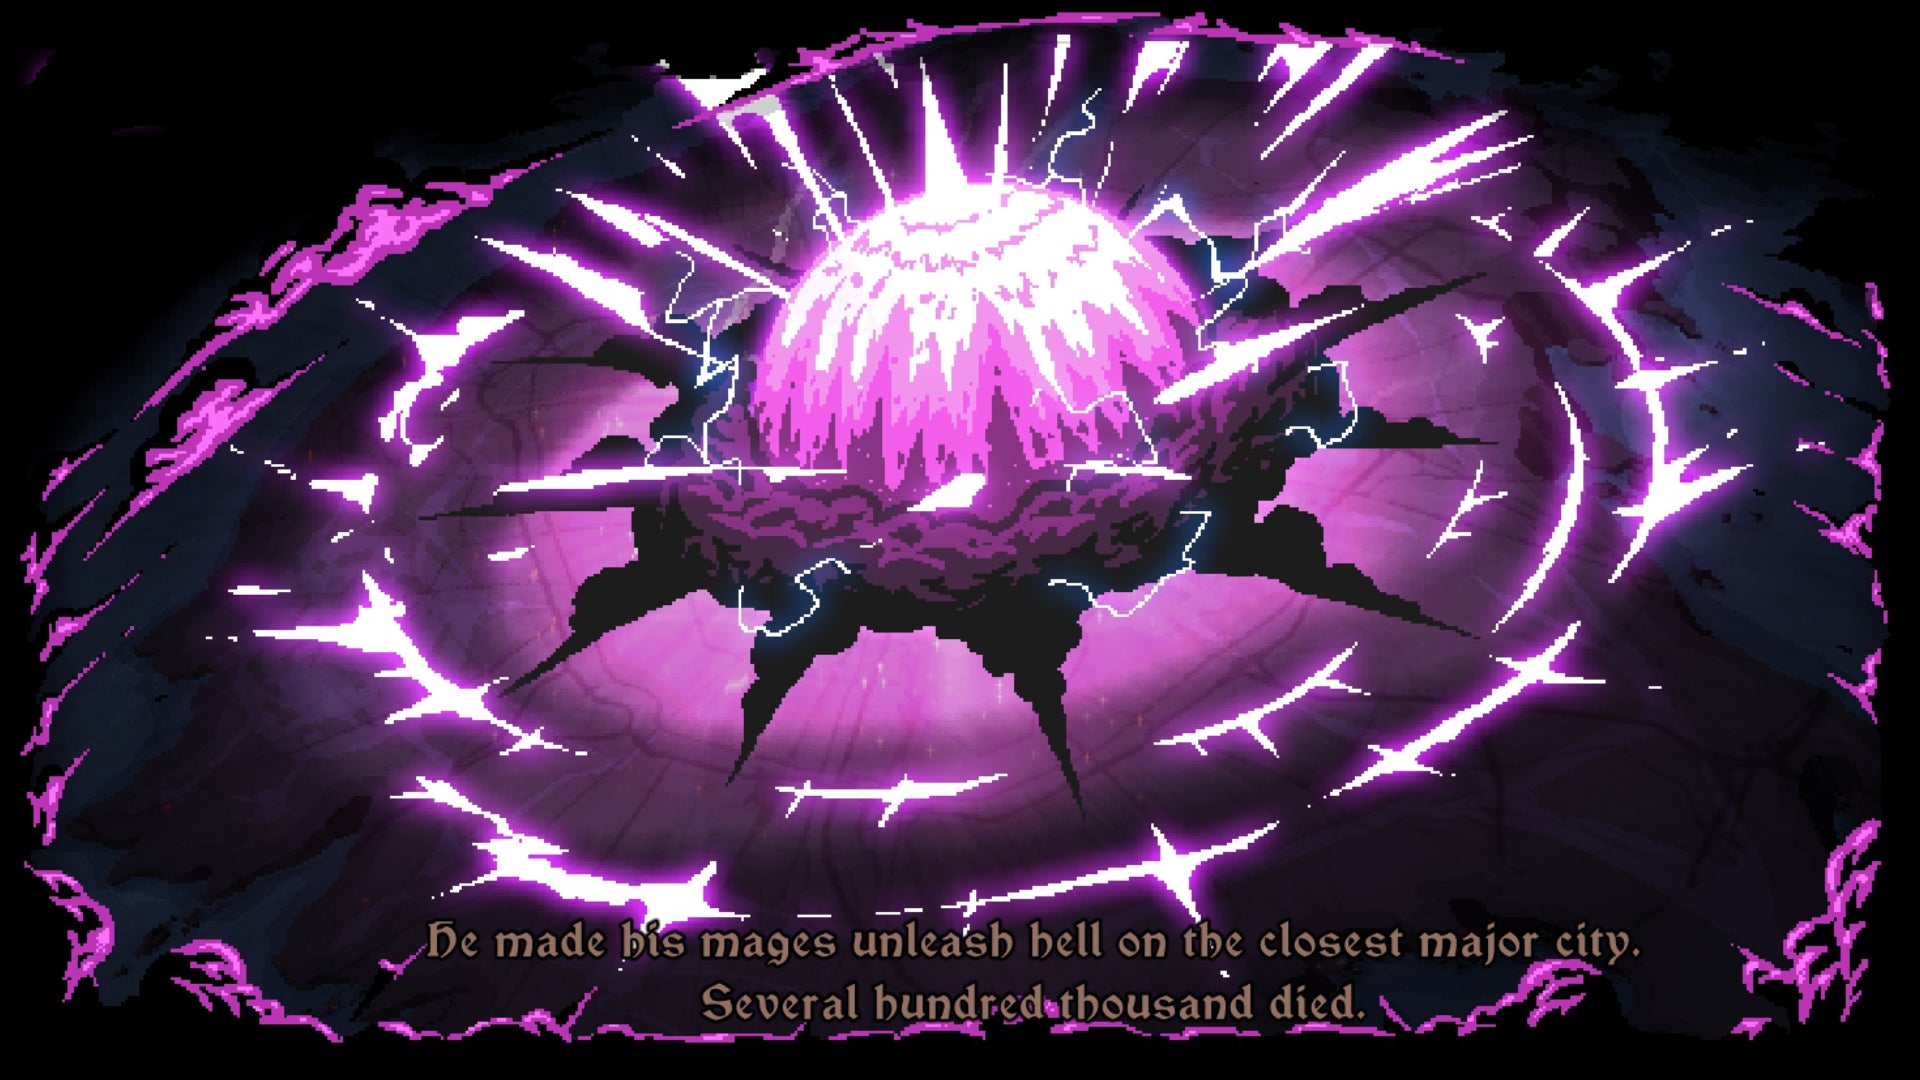 A section from the opening sequence of The Last Spell, showing a city exploding in a gigantic ball of purple energy.